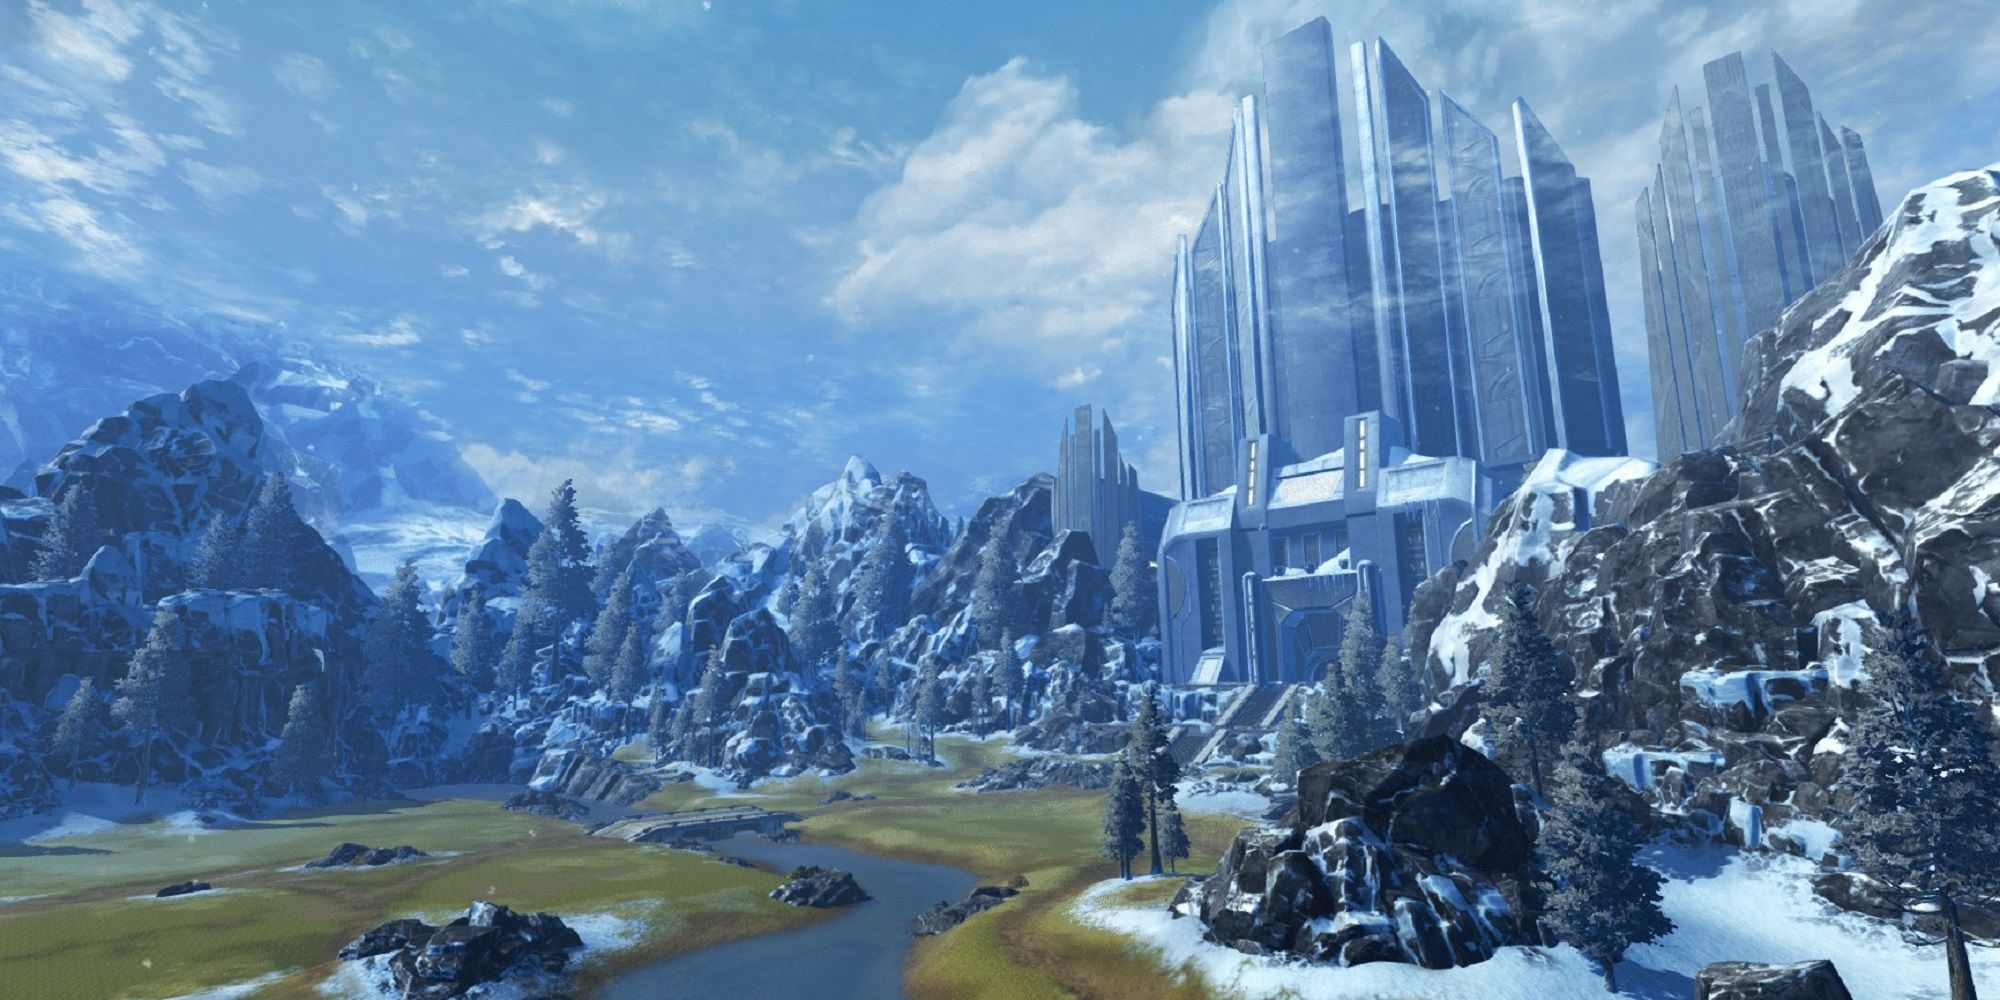 SWTOR's Alderaan Noble Estate, a large castle set in snow-covered mountains with a river in front